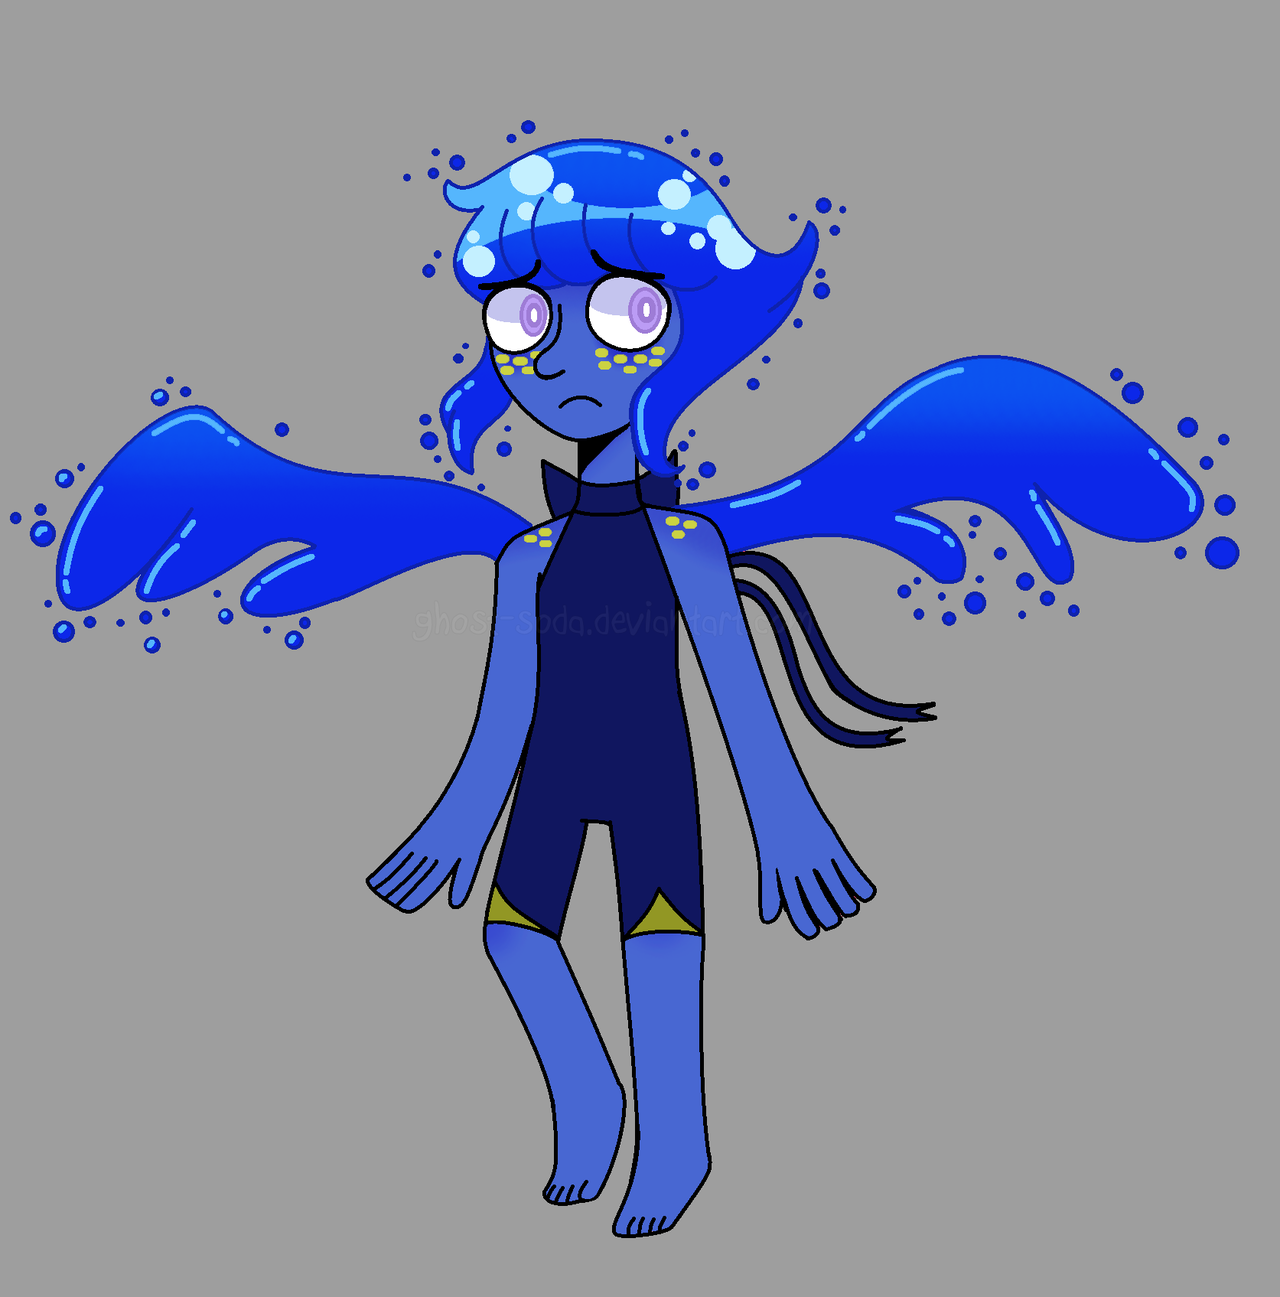 i’ve been seeing people redesign su characters and i decided that the gem in most desperate need of a redesign was lapis so here ya go.